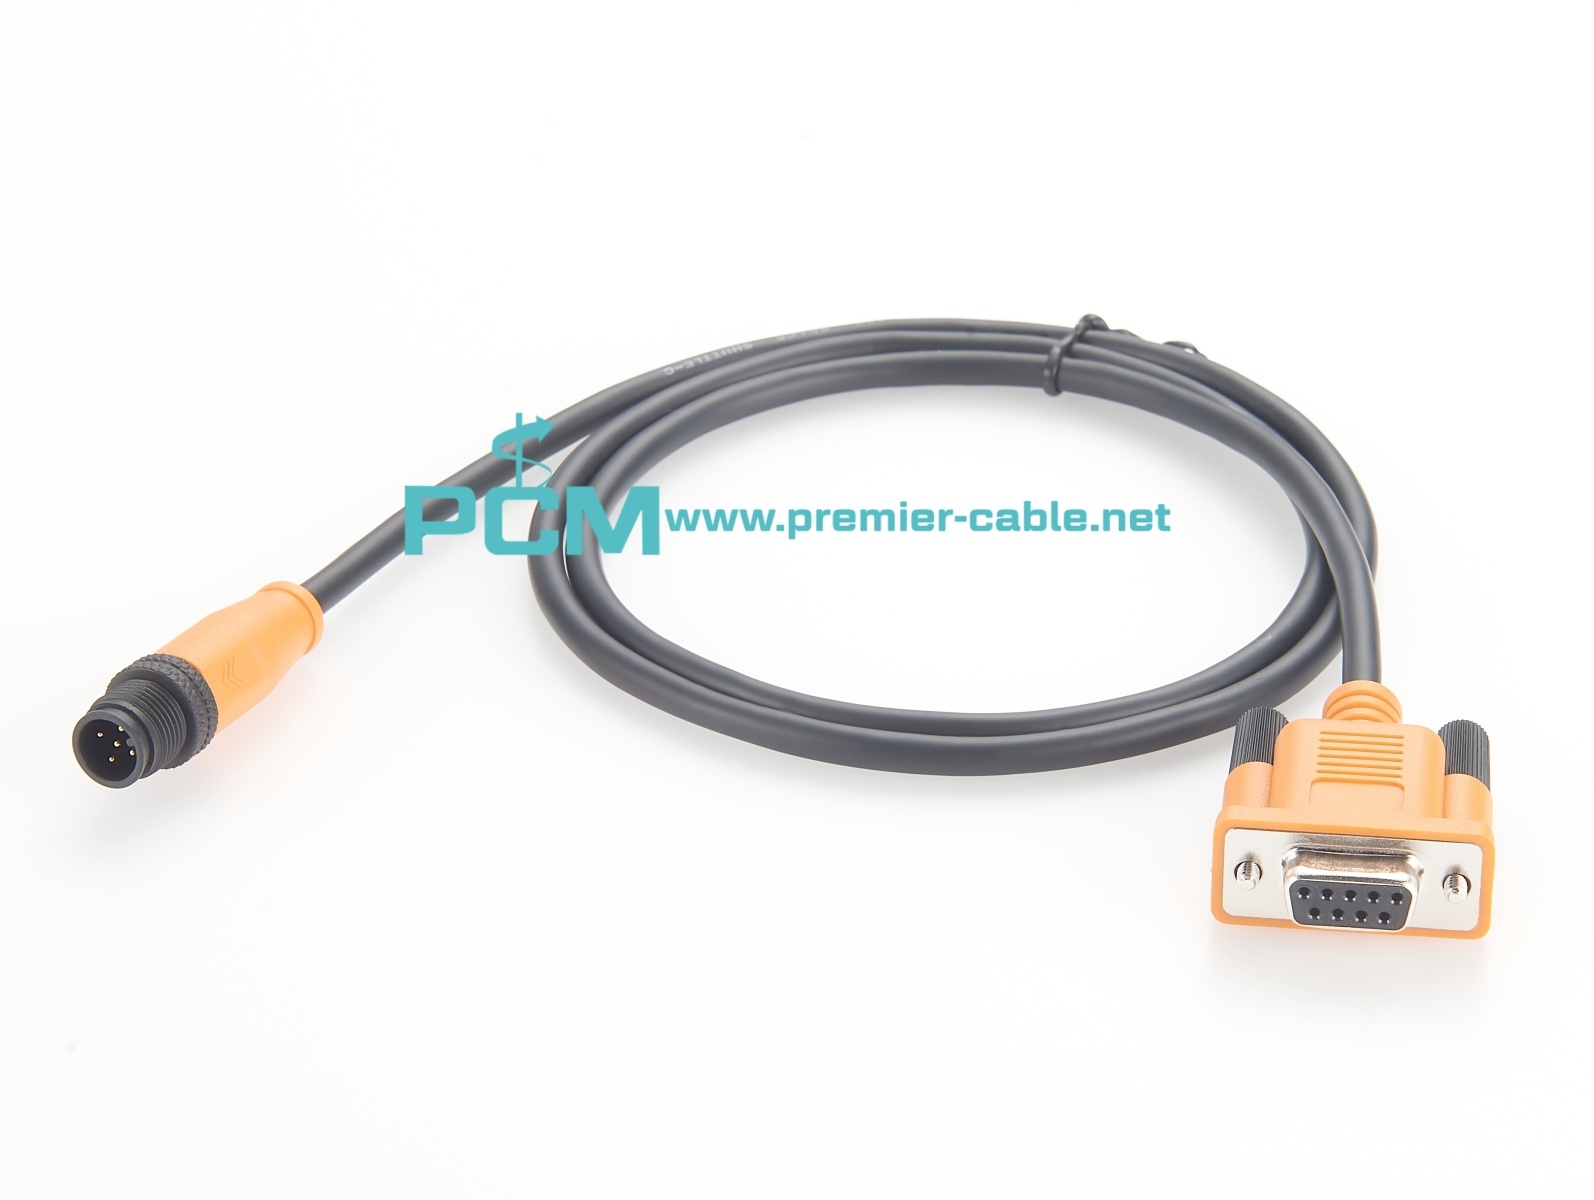 Premier Cable M12 Adapter Cable NMEA 2000 CANopen